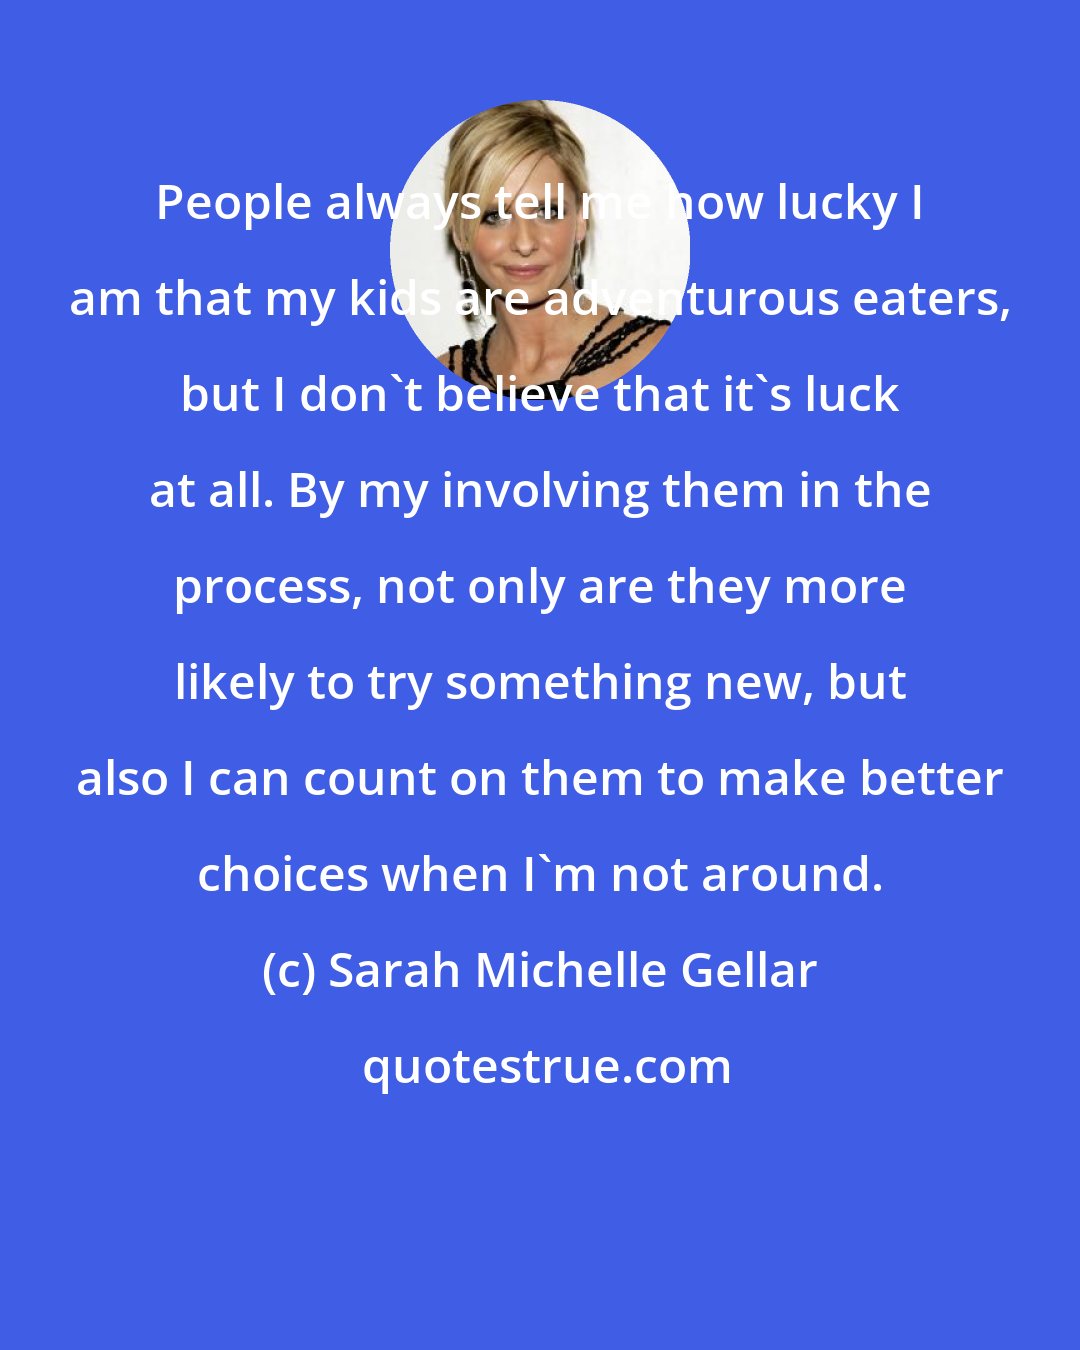 Sarah Michelle Gellar: People always tell me how lucky I am that my kids are adventurous eaters, but I don't believe that it's luck at all. By my involving them in the process, not only are they more likely to try something new, but also I can count on them to make better choices when I'm not around.